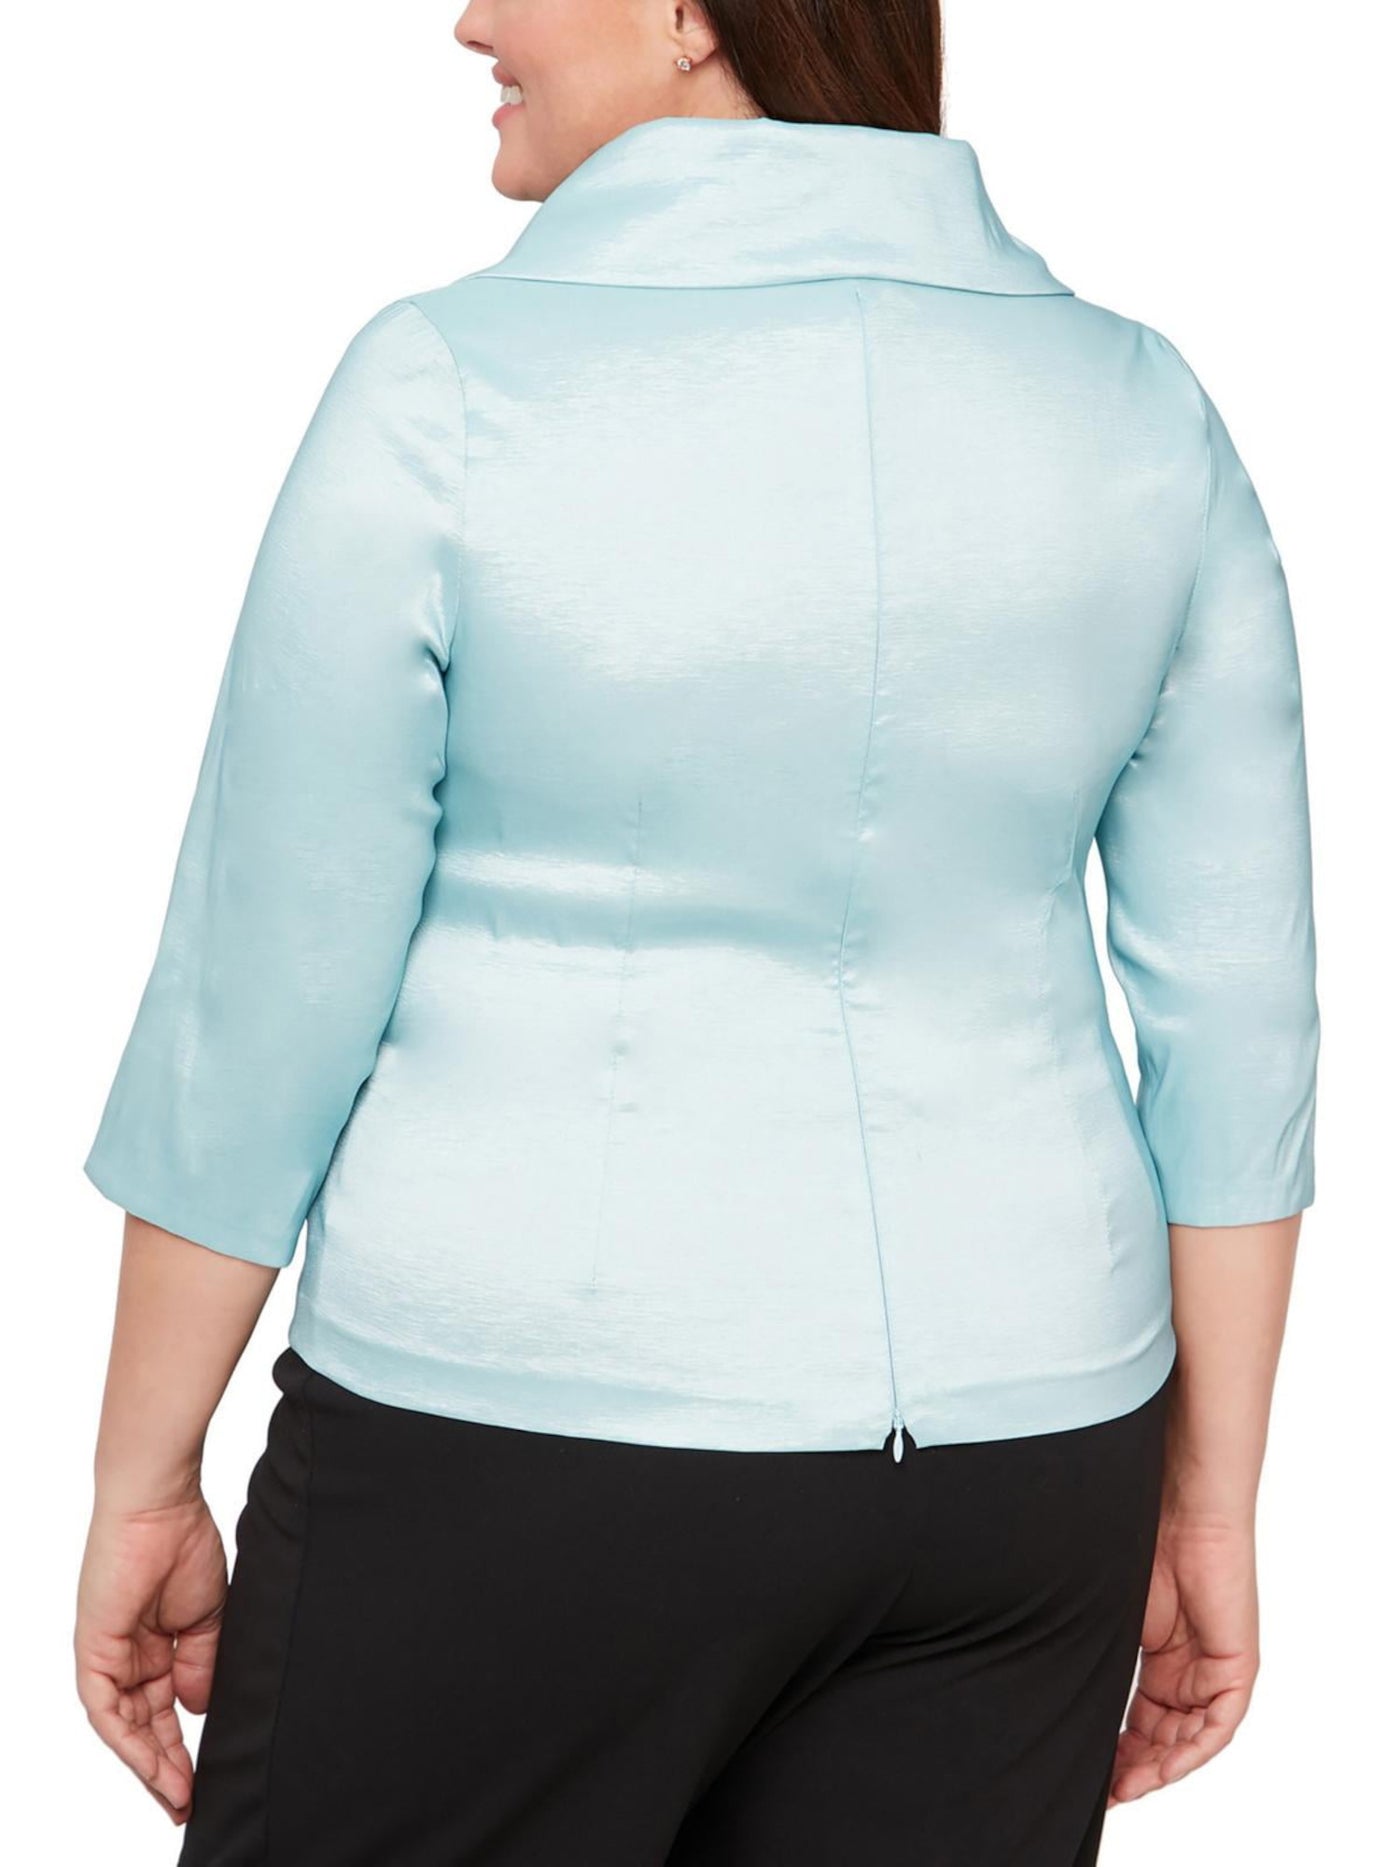 ALEX EVENINGS WOMAN Womens Teal Zippered Textured Unlined Tie Waist 3/4 Sleeve Collared Wear To Work Blouse Plus 1X